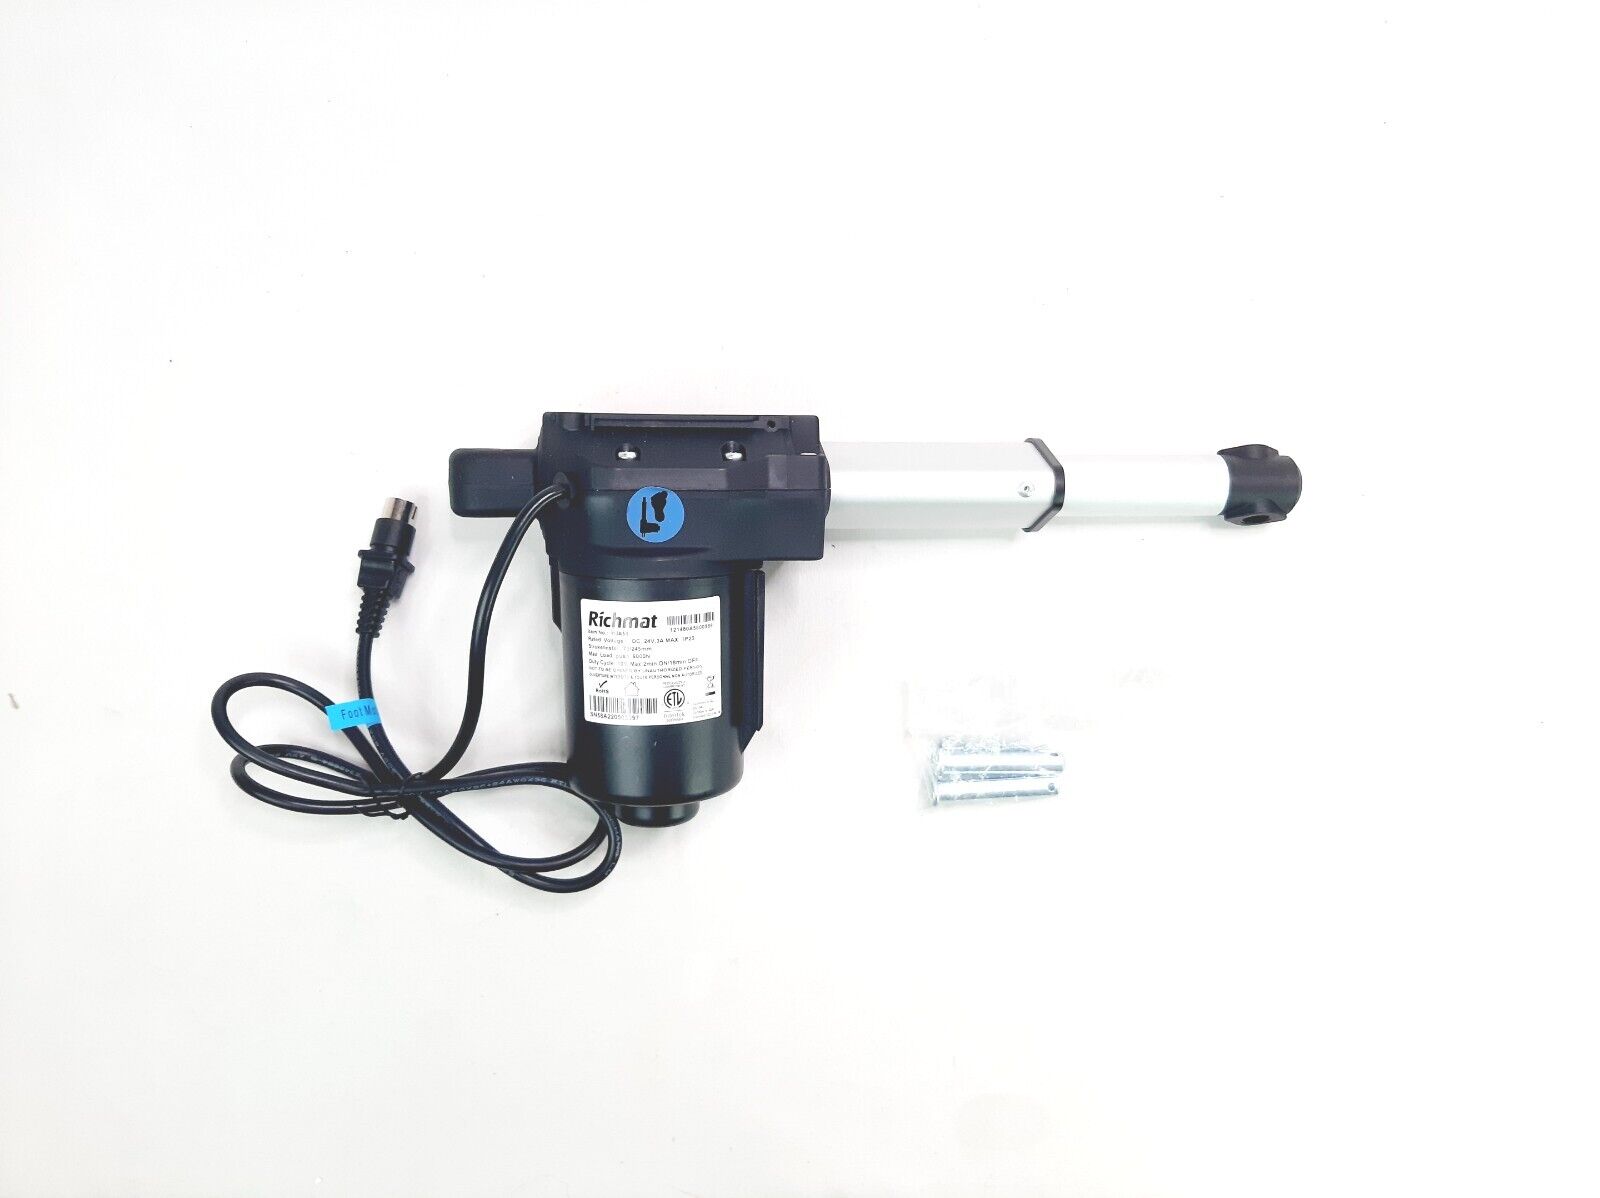 Richmat Hja58 Adjustable Bed Linear Actuator 70/245mm, Max Load Push 6000n